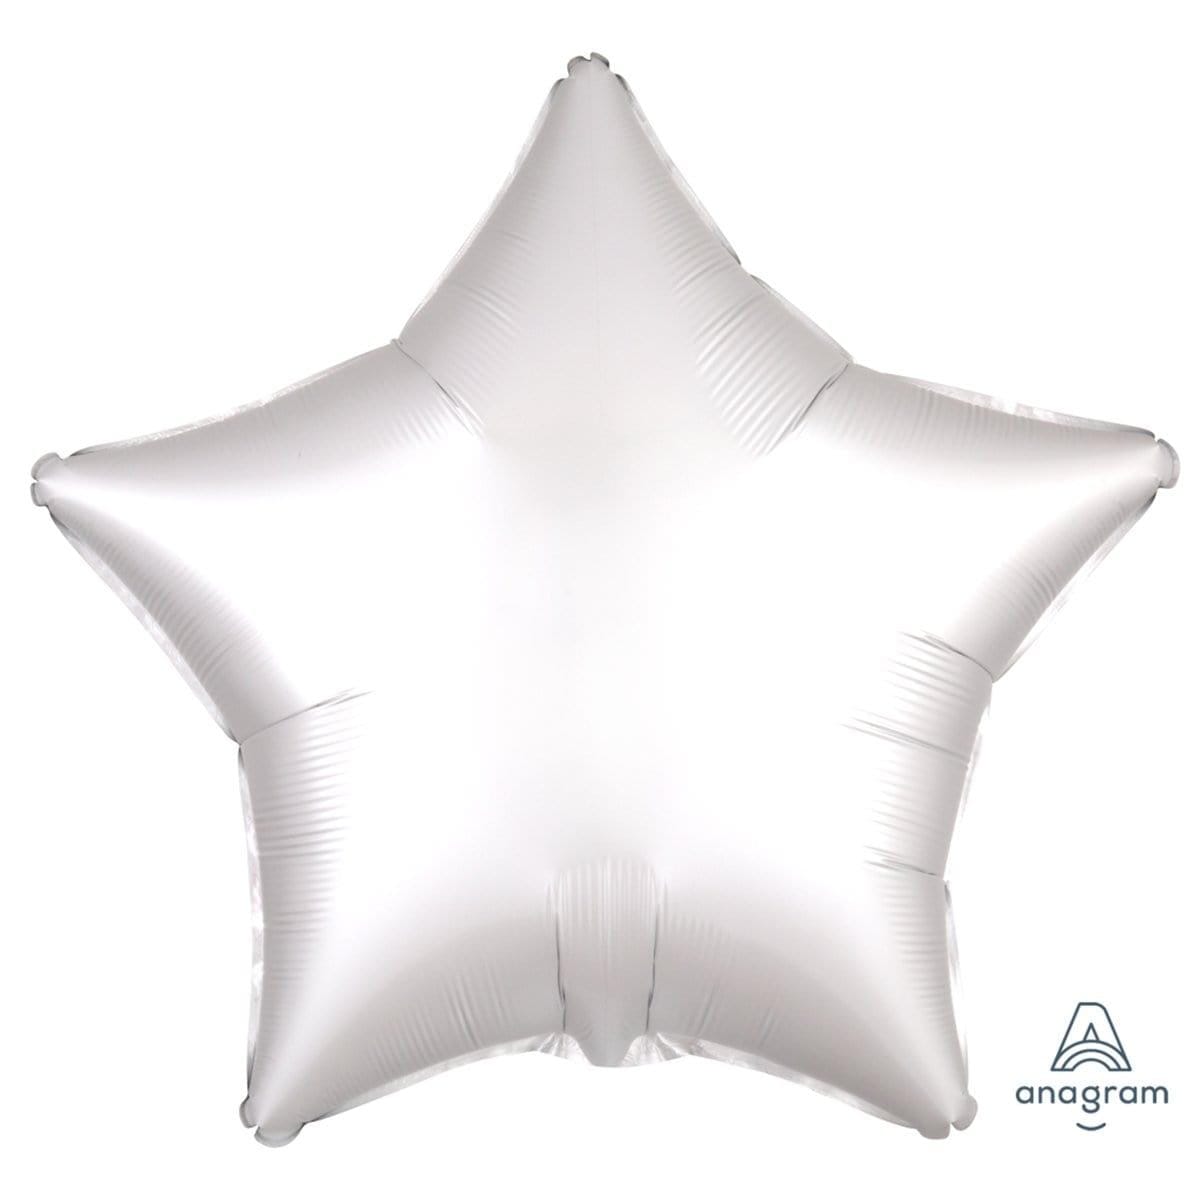 Buy Balloons White Star Shape Foil Balloon, 18 Inches sold at Party Expert